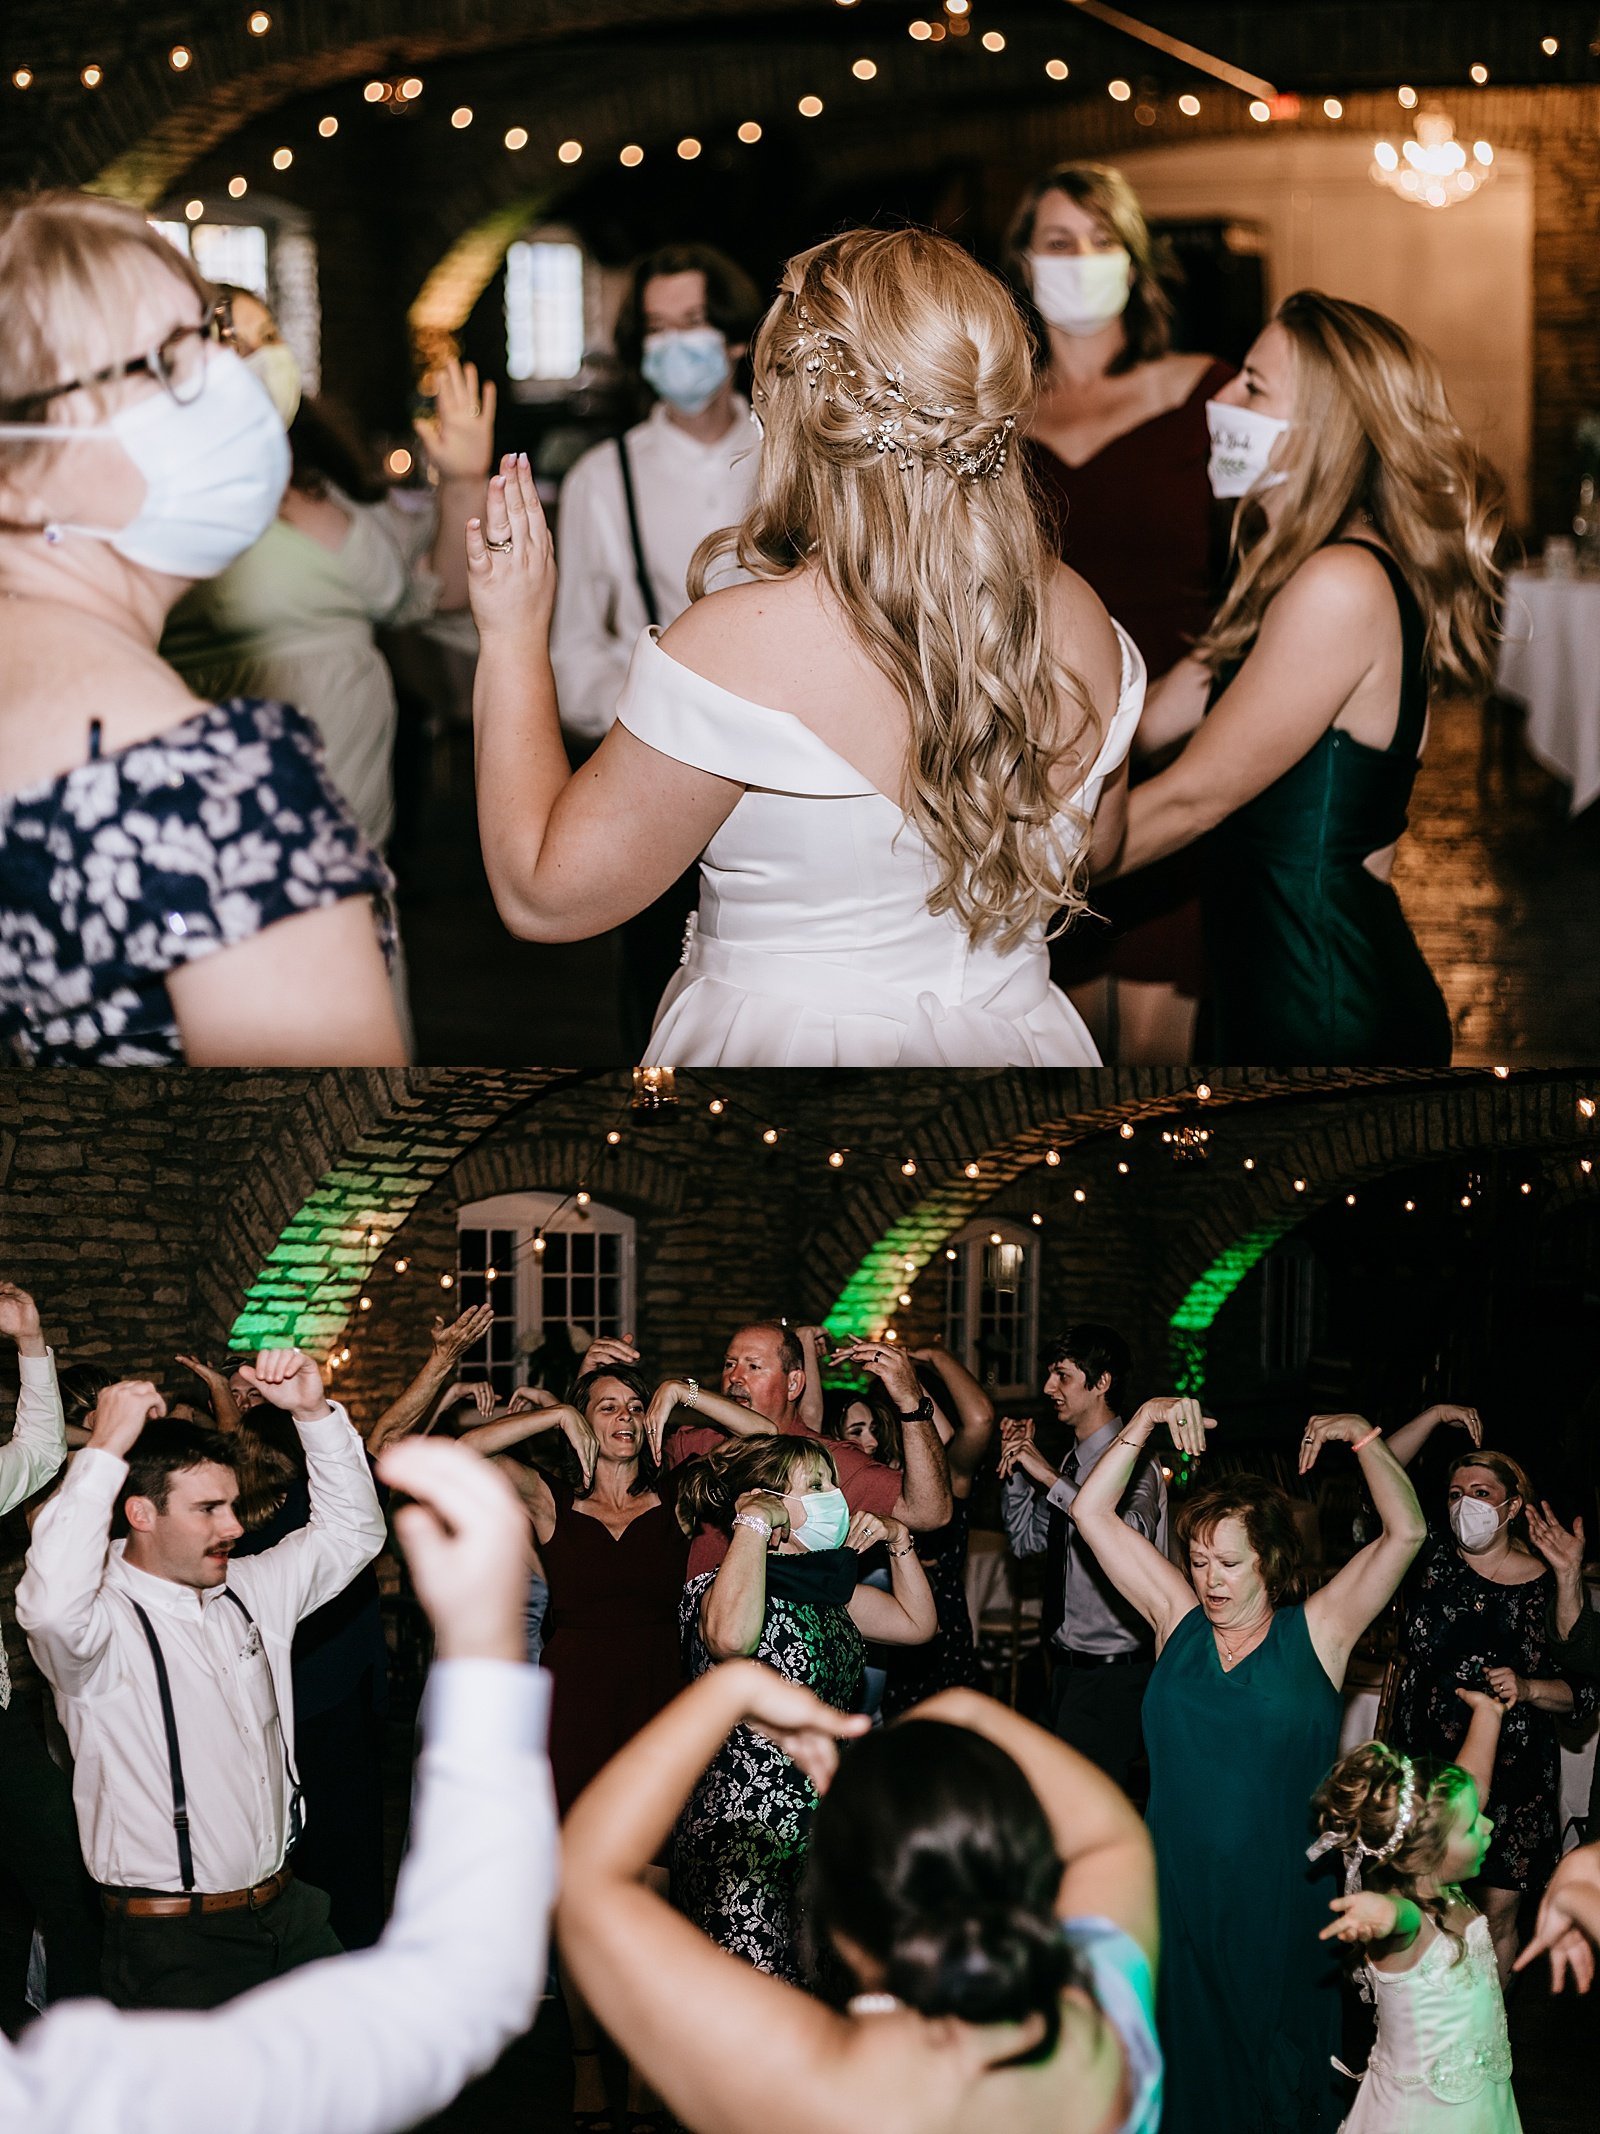  Guests dancing wildly at reception by Minneapolis wedding photographer, McKenzie Berquam  